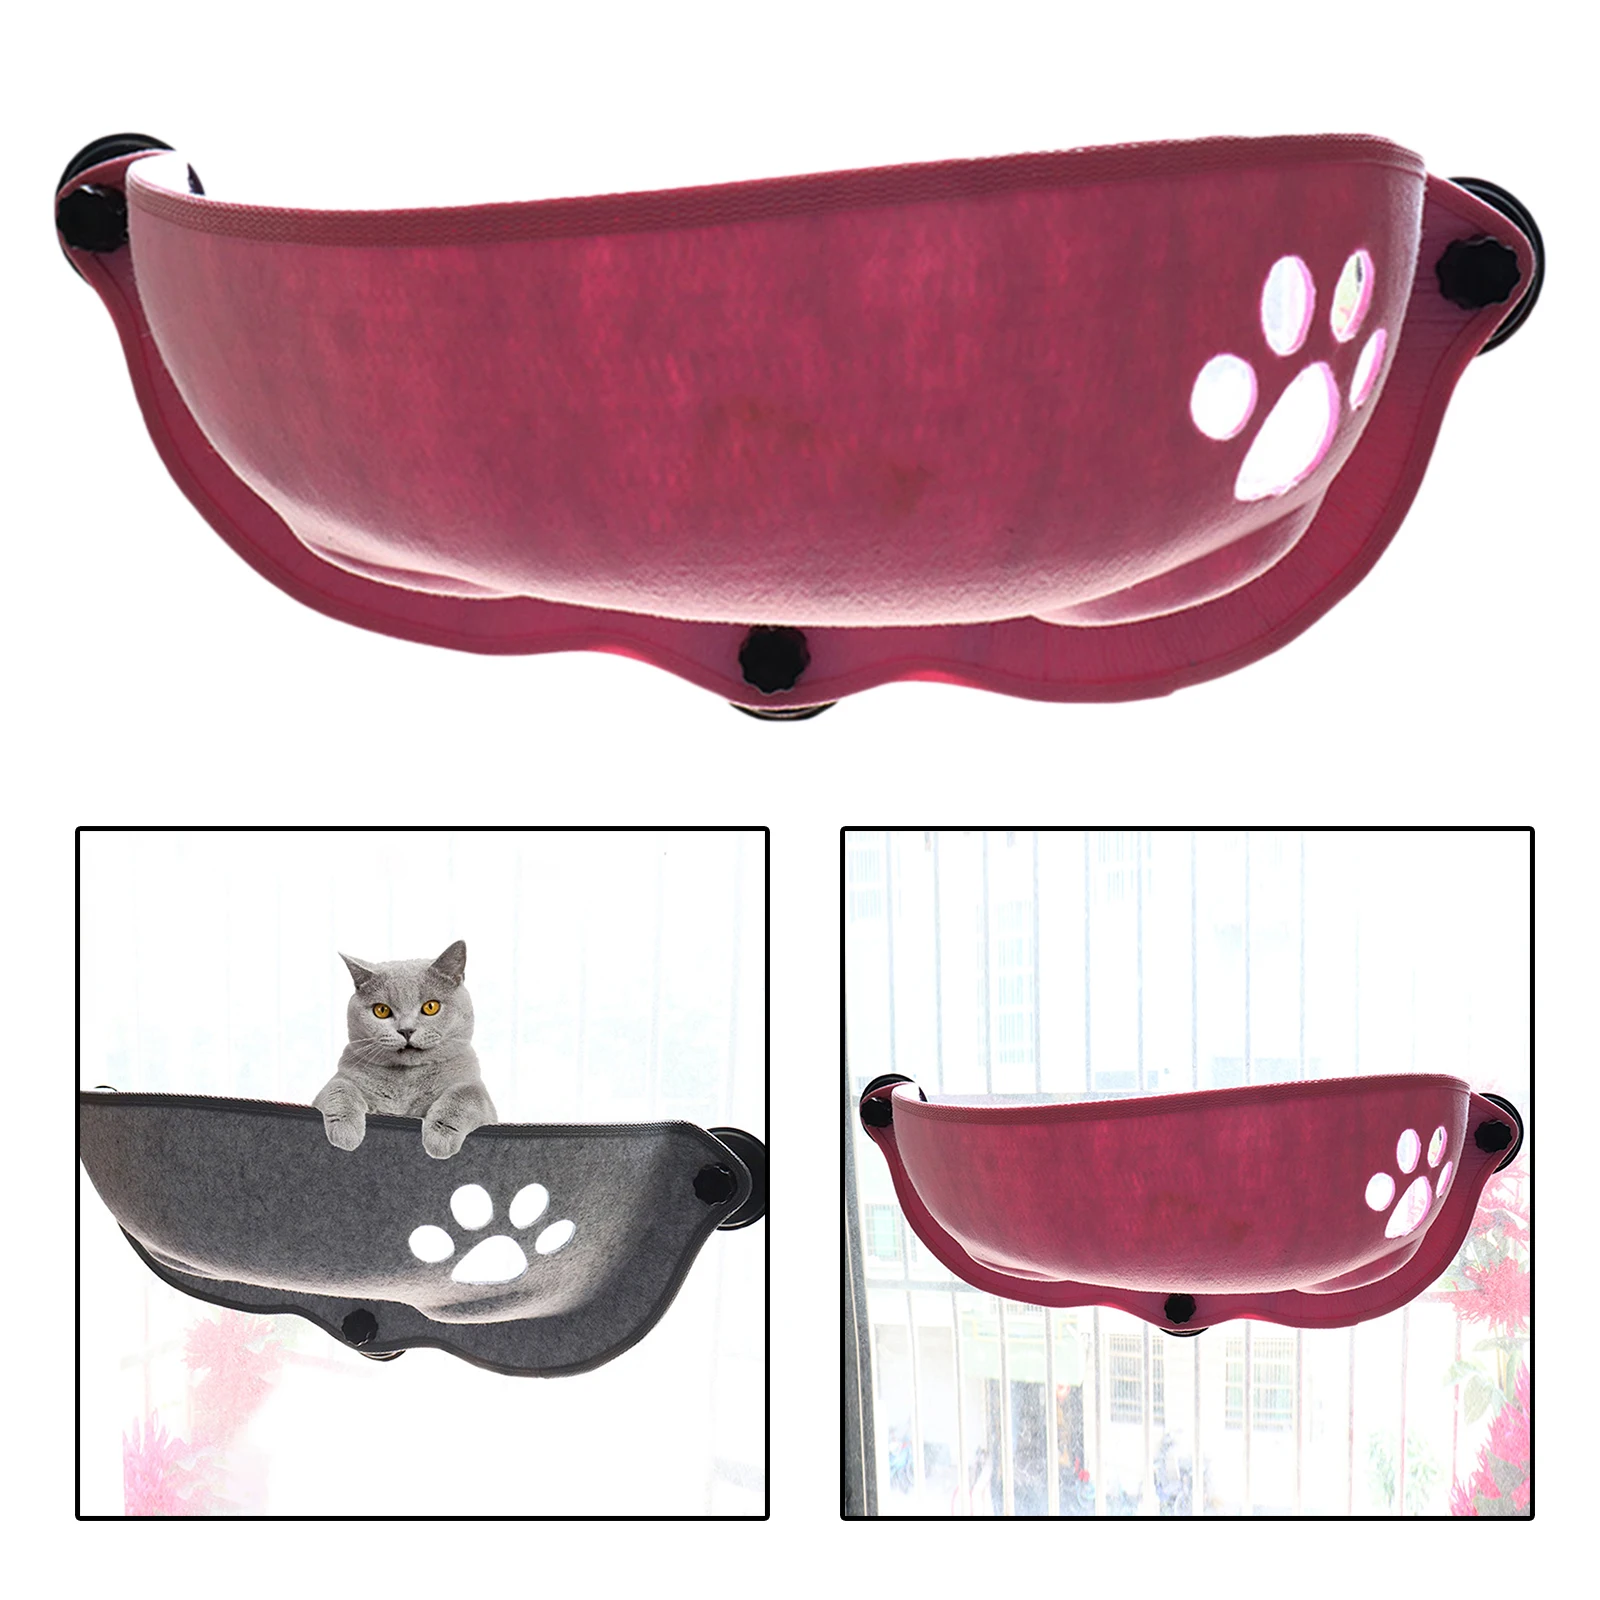 Window Bed Hammock Kitty Sill Sunny Seat for Indoor Car, Pet Cat Rest Sleeping Bed Sunbath Seat Holds Up to 33 lbs Safety Seat